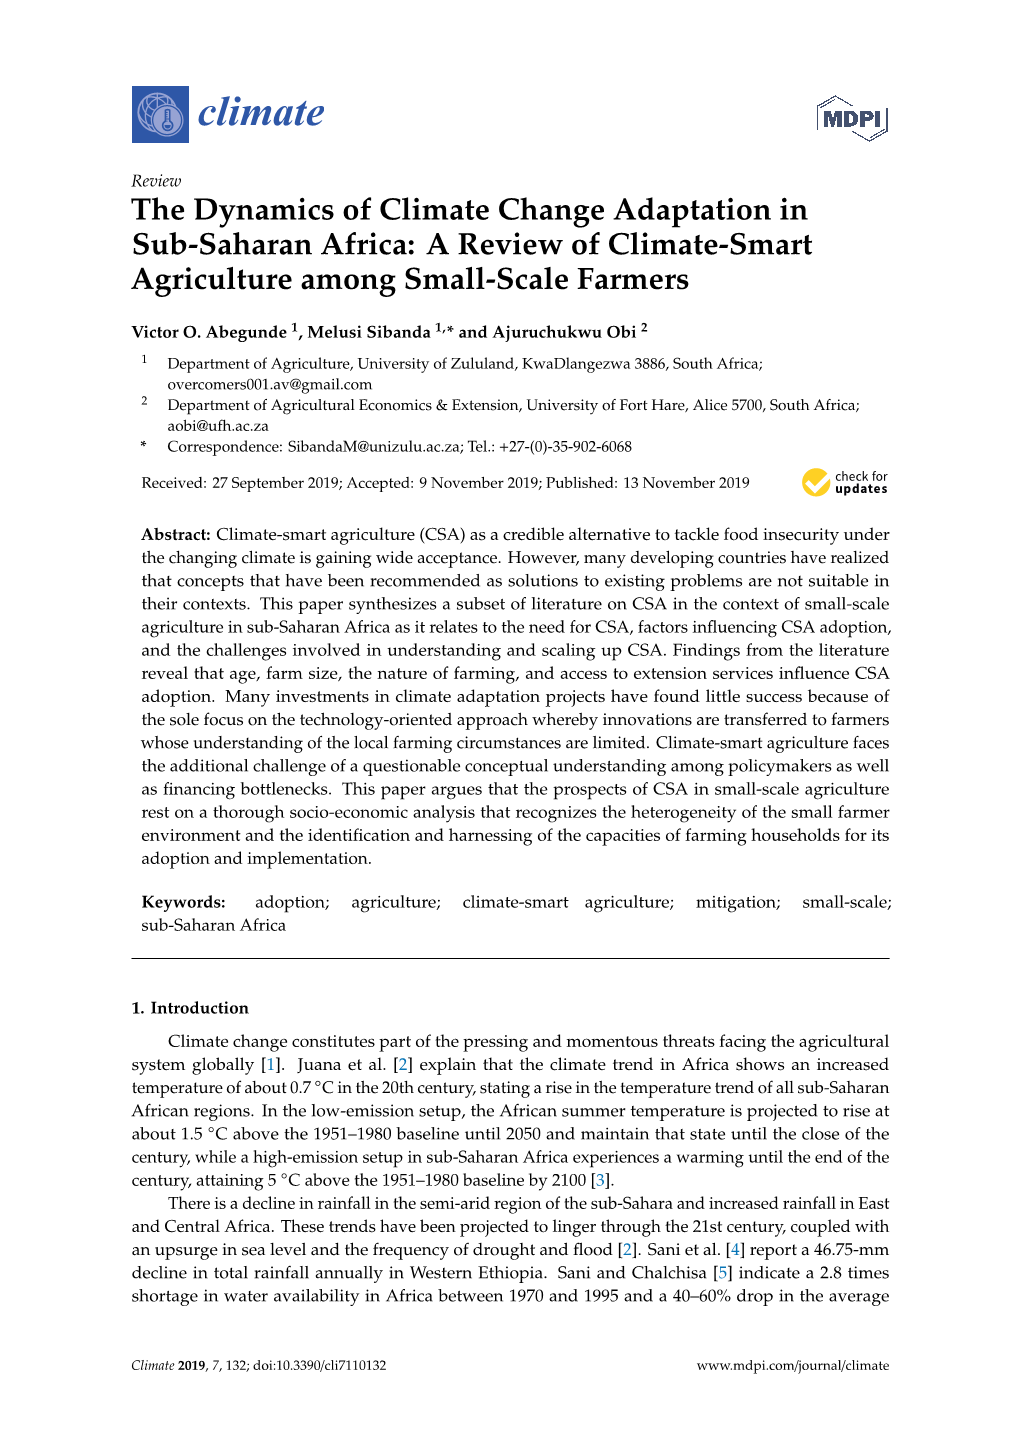 The Dynamics of Climate Change Adaptation in Sub-Saharan Africa: a Review of Climate-Smart Agriculture Among Small-Scale Farmers